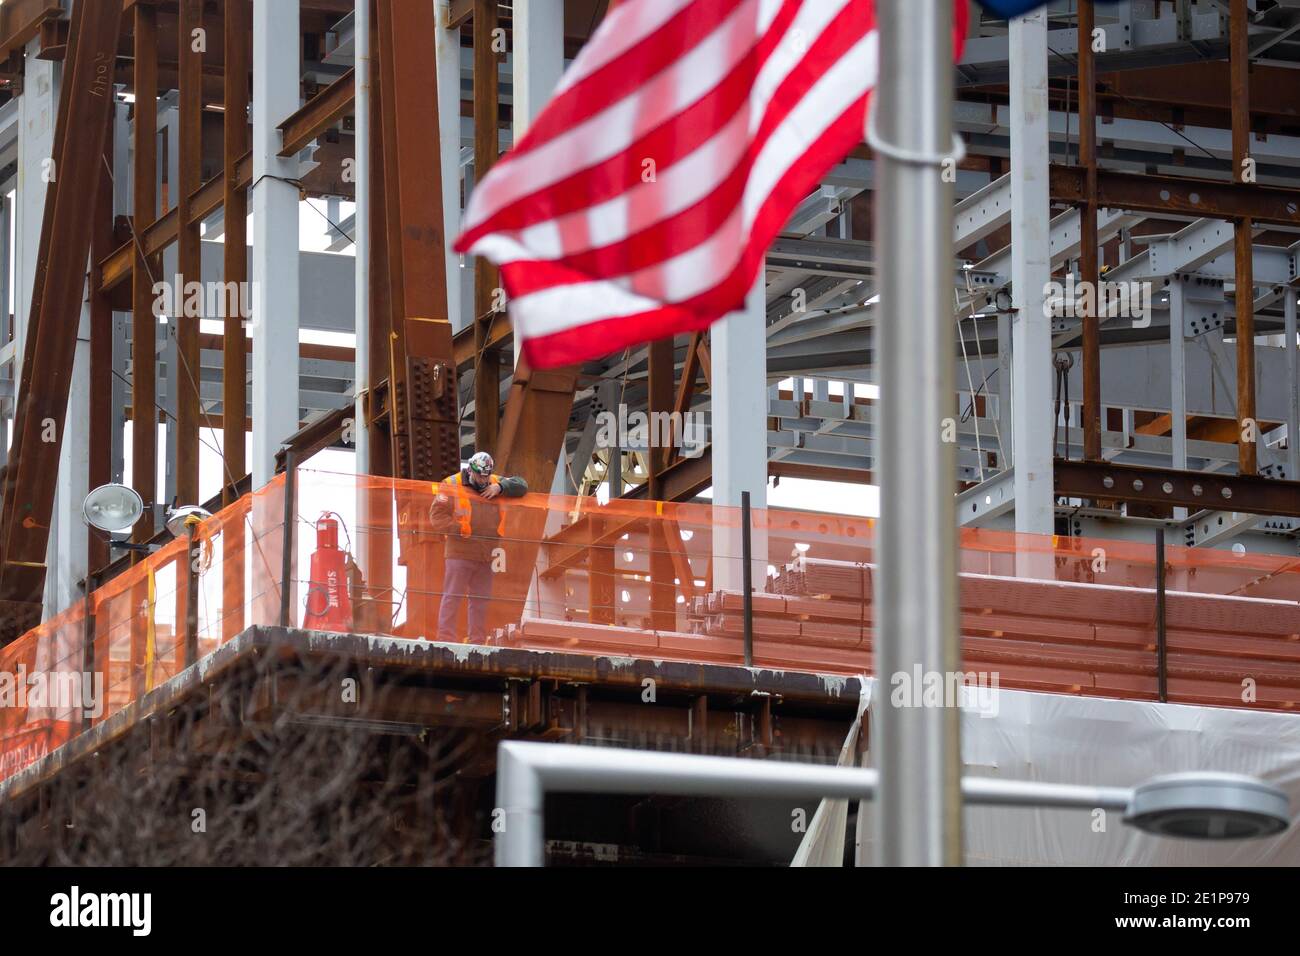 New York, USA. 8th Jan, 2021. A construction worker works at the Ronald O. Perelman Performing Arts Center at the World Trade Center construction site, in New York, United States, Jan. 8, 2021. U.S. employers slashed 140,000 jobs in December, the first monthly decline since April 2020, as the recent COVID-19 spikes disrupted labor market recovery, the Labor Department reported Friday. The unemployment rate, which has been trending down over the past seven months, remained unchanged at 6.7 percent, according to the monthly employment report. Credit: Michael Nagle/Xinhua/Alamy Live News Stock Photo